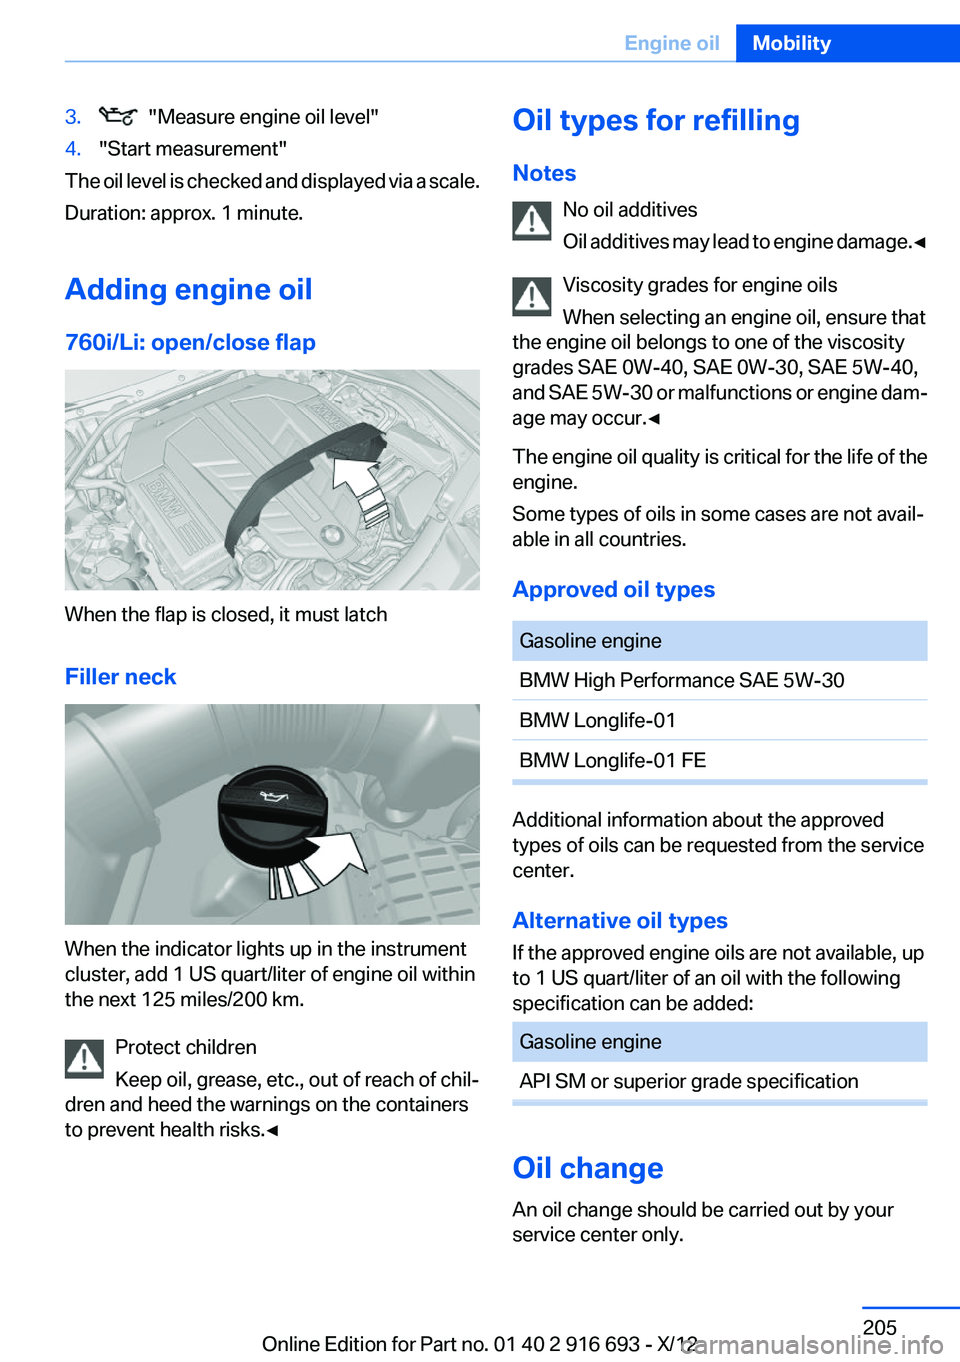 BMW 750I 2013  Owners Manual 3.  "Measure engine oil level"4."Start measurement"
The oil level is checked and displayed via a scale.
Duration: approx. 1 minute.
Adding engine oil
760i/Li: open/close flap
When the 